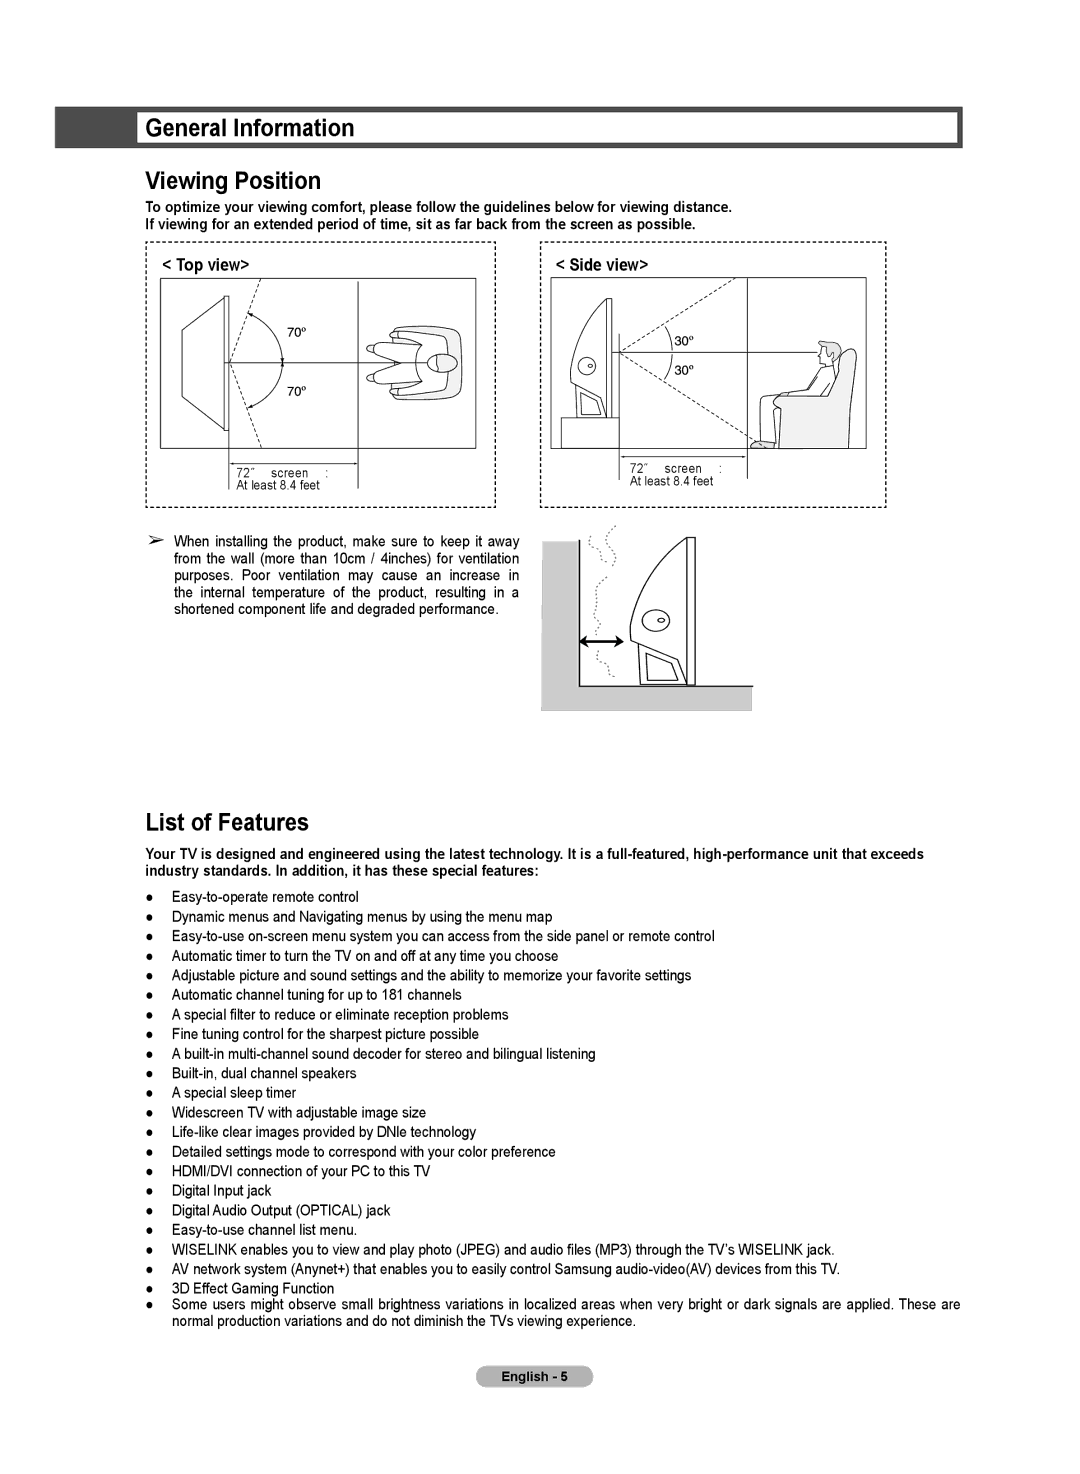 Samsung HL72A650C1F user manual General Information Viewing Position, List of Features 